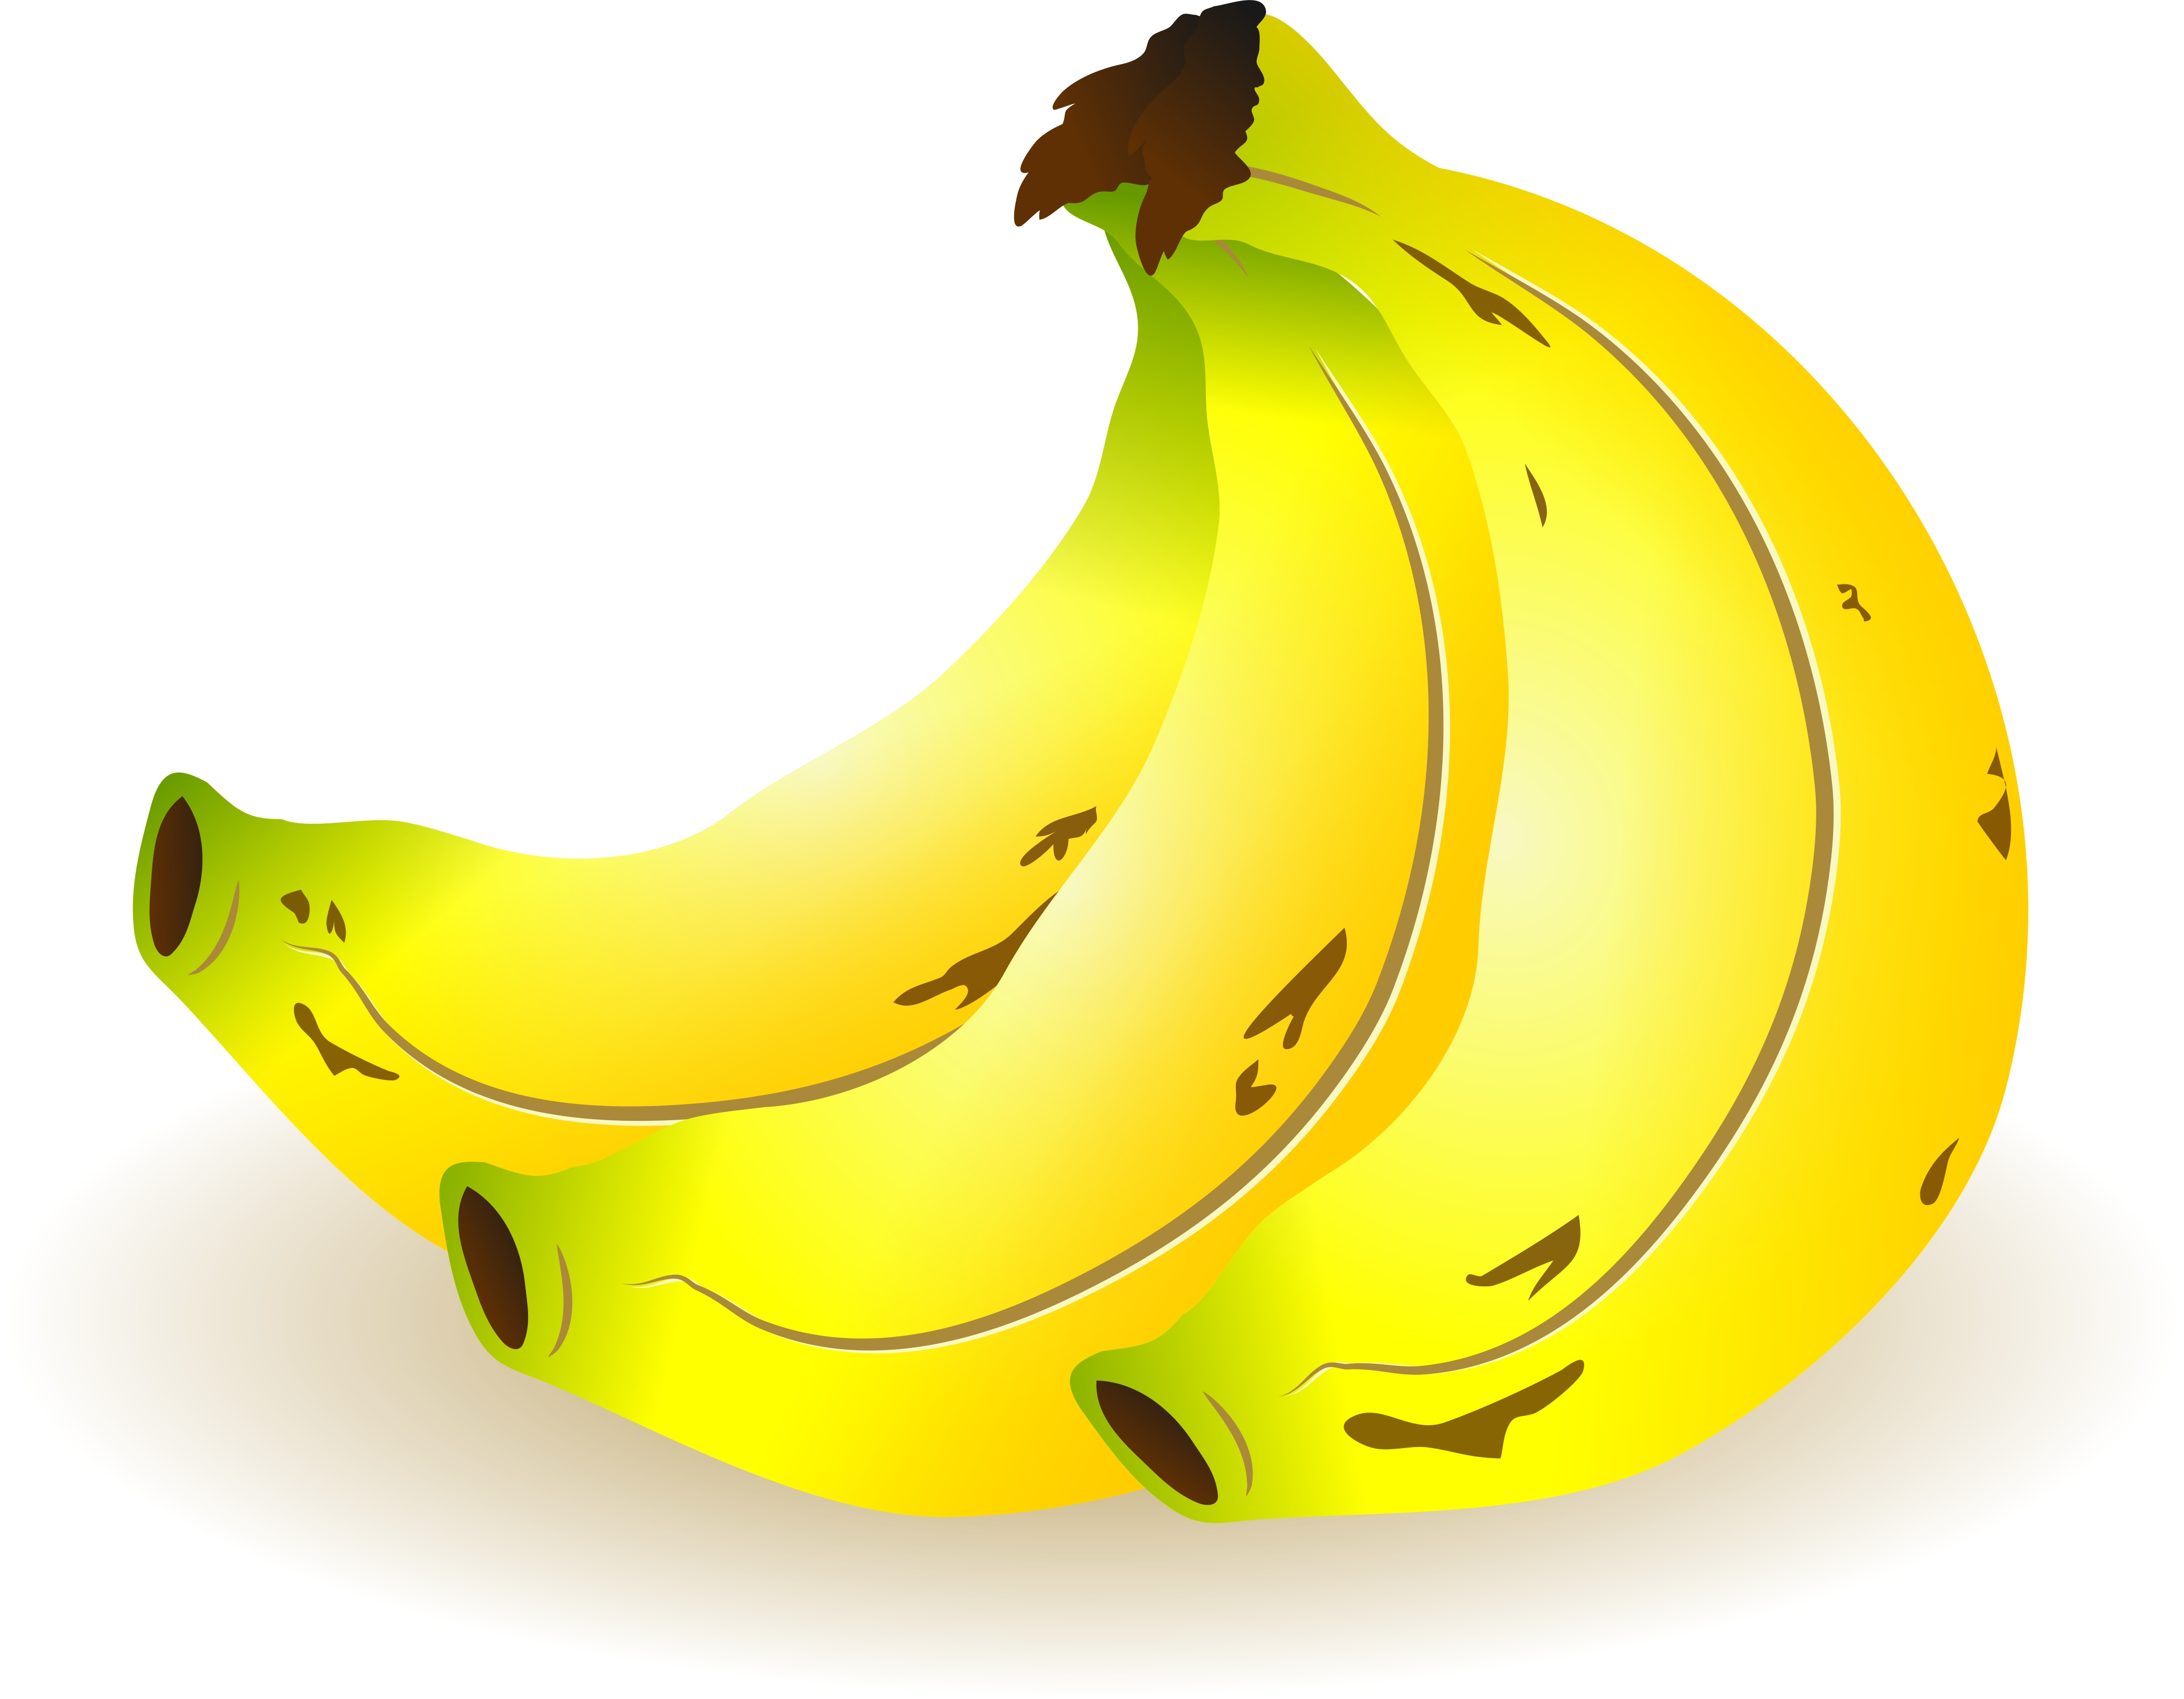 Bunch Of Bananas   Free Images At Clker Com   Vector Clip Art Online